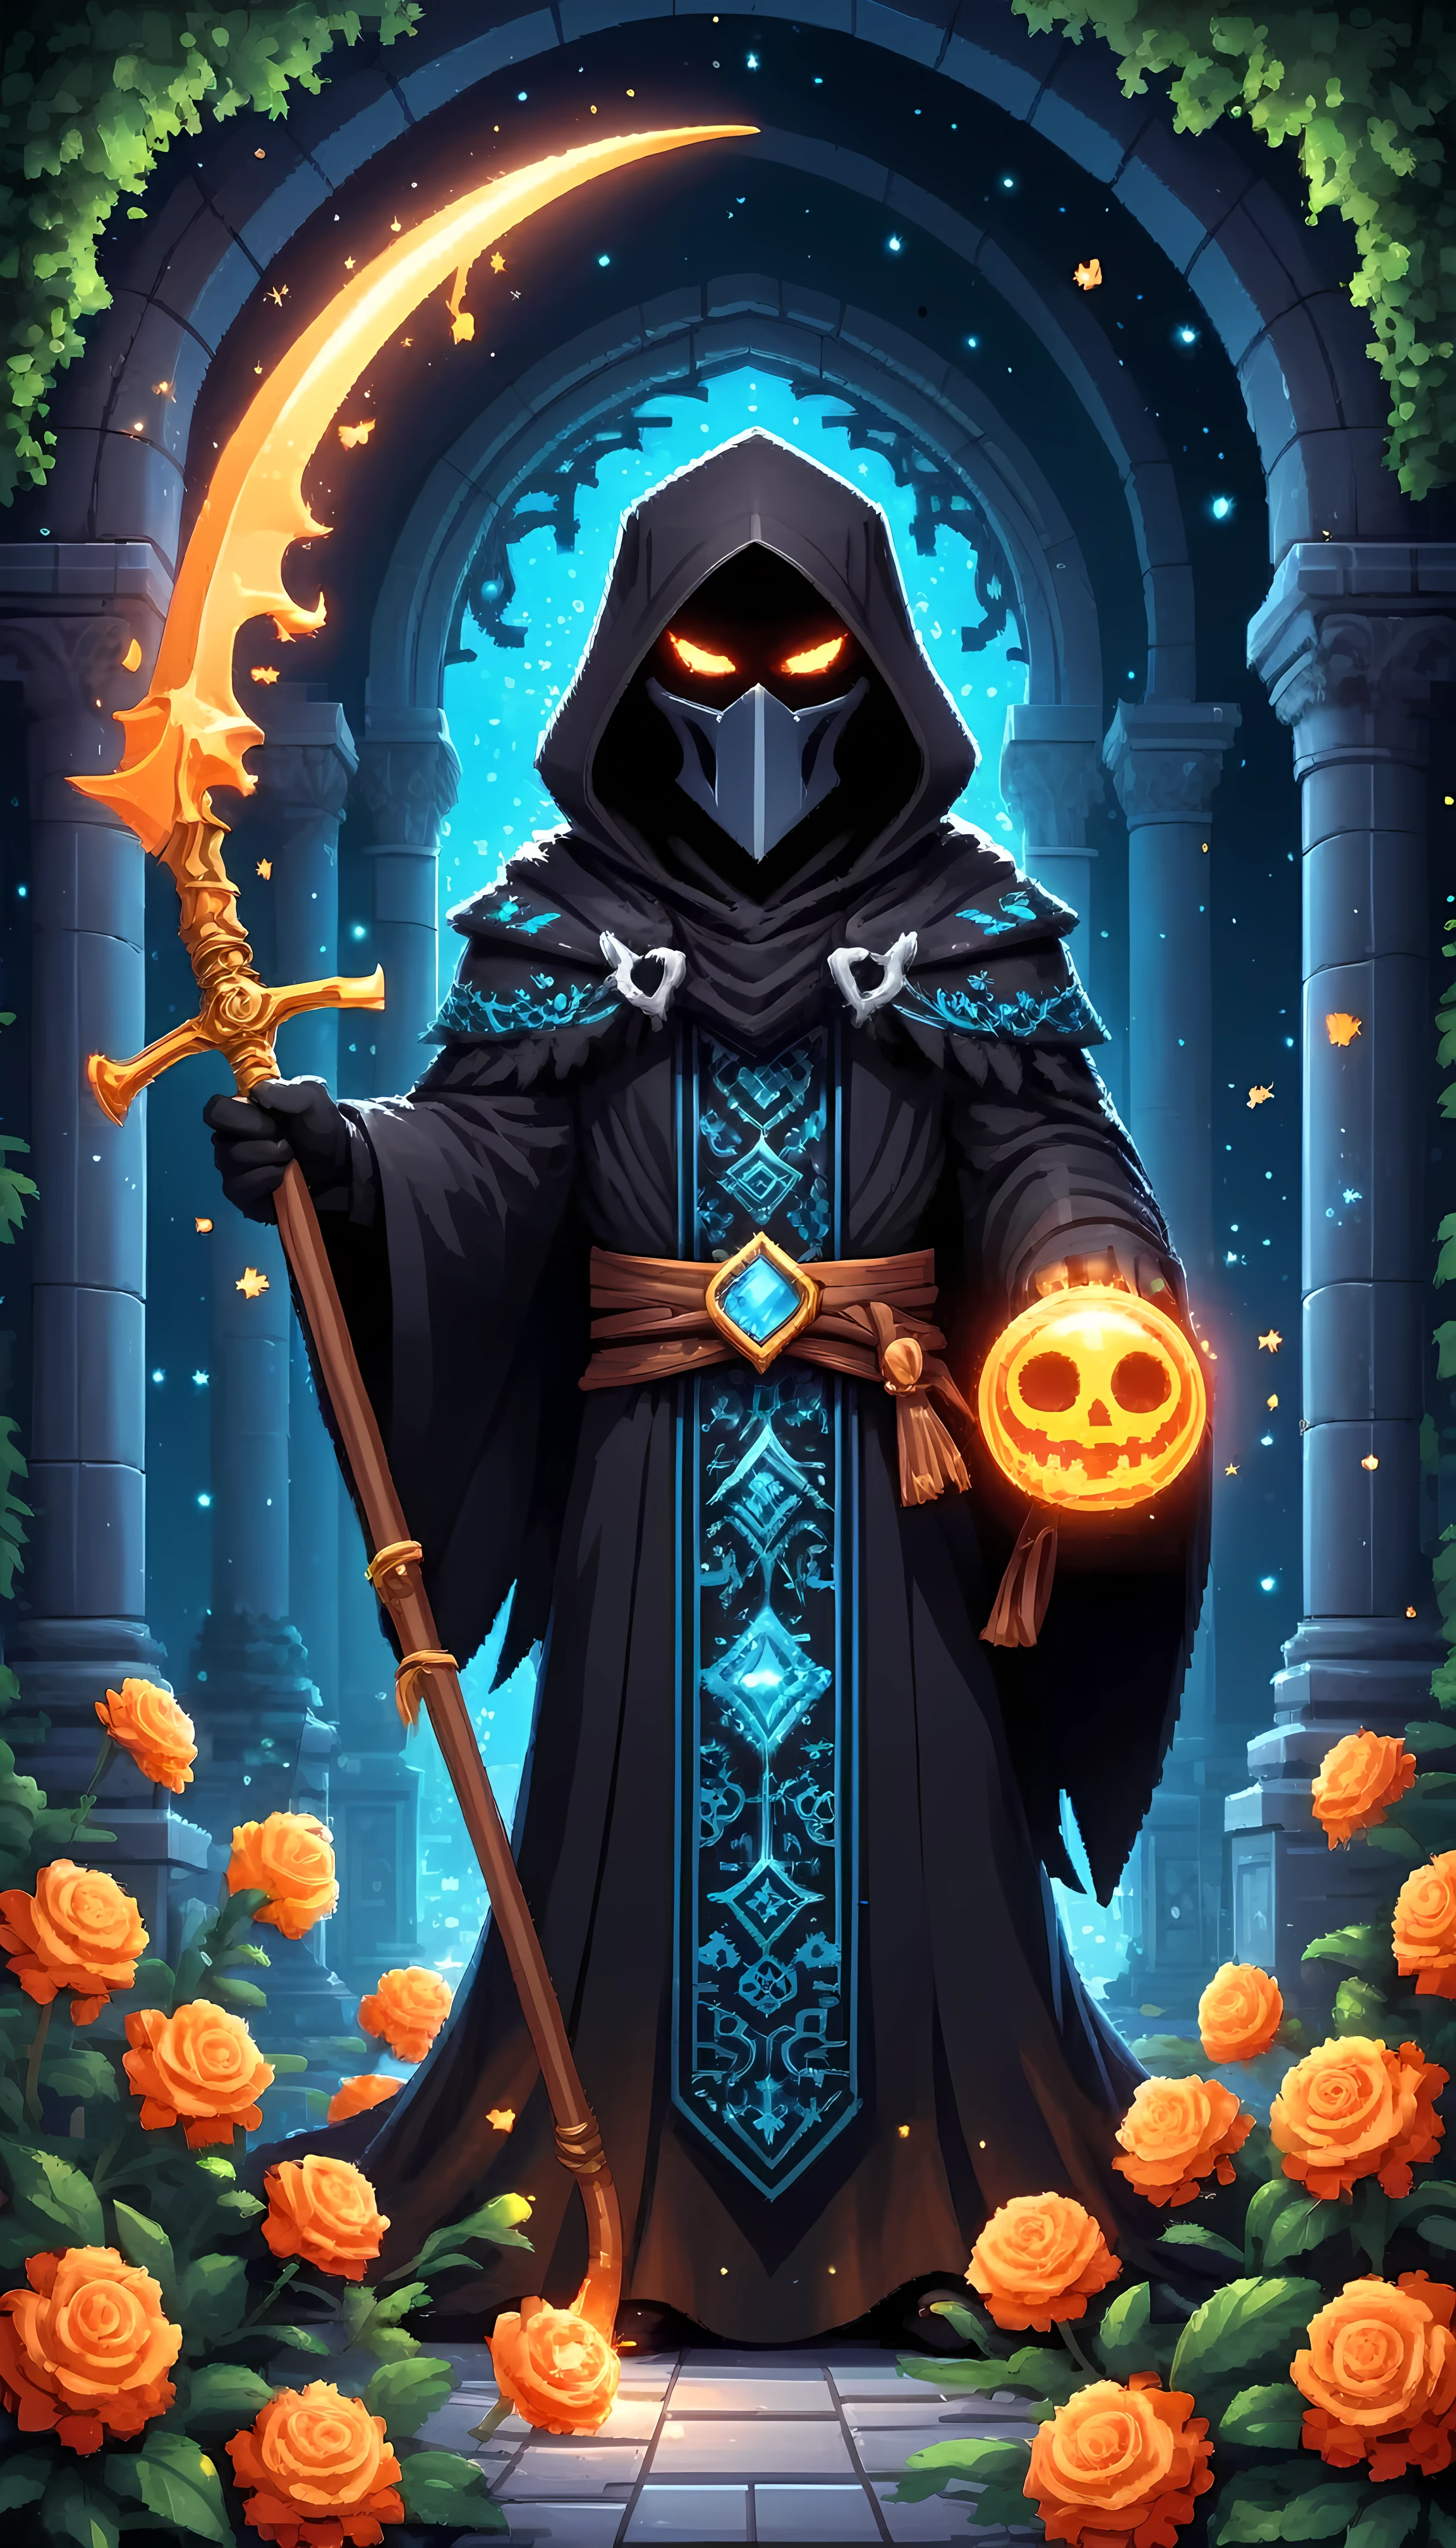 Bright epic professional (cute cartoon pixel illustration:1.2), (masterpiece in maximum 16K resolution, superb quality, ultra detailed:1.3), grip reaper holding a long (decorative scythe:1.2) with (light blue magic orbs), (holding a single rose), standing near a (grand tombstone), wearing a full dark cloak with (glowing runes), amidst forest cemetery, sparkles, starry night with crescent moon.
